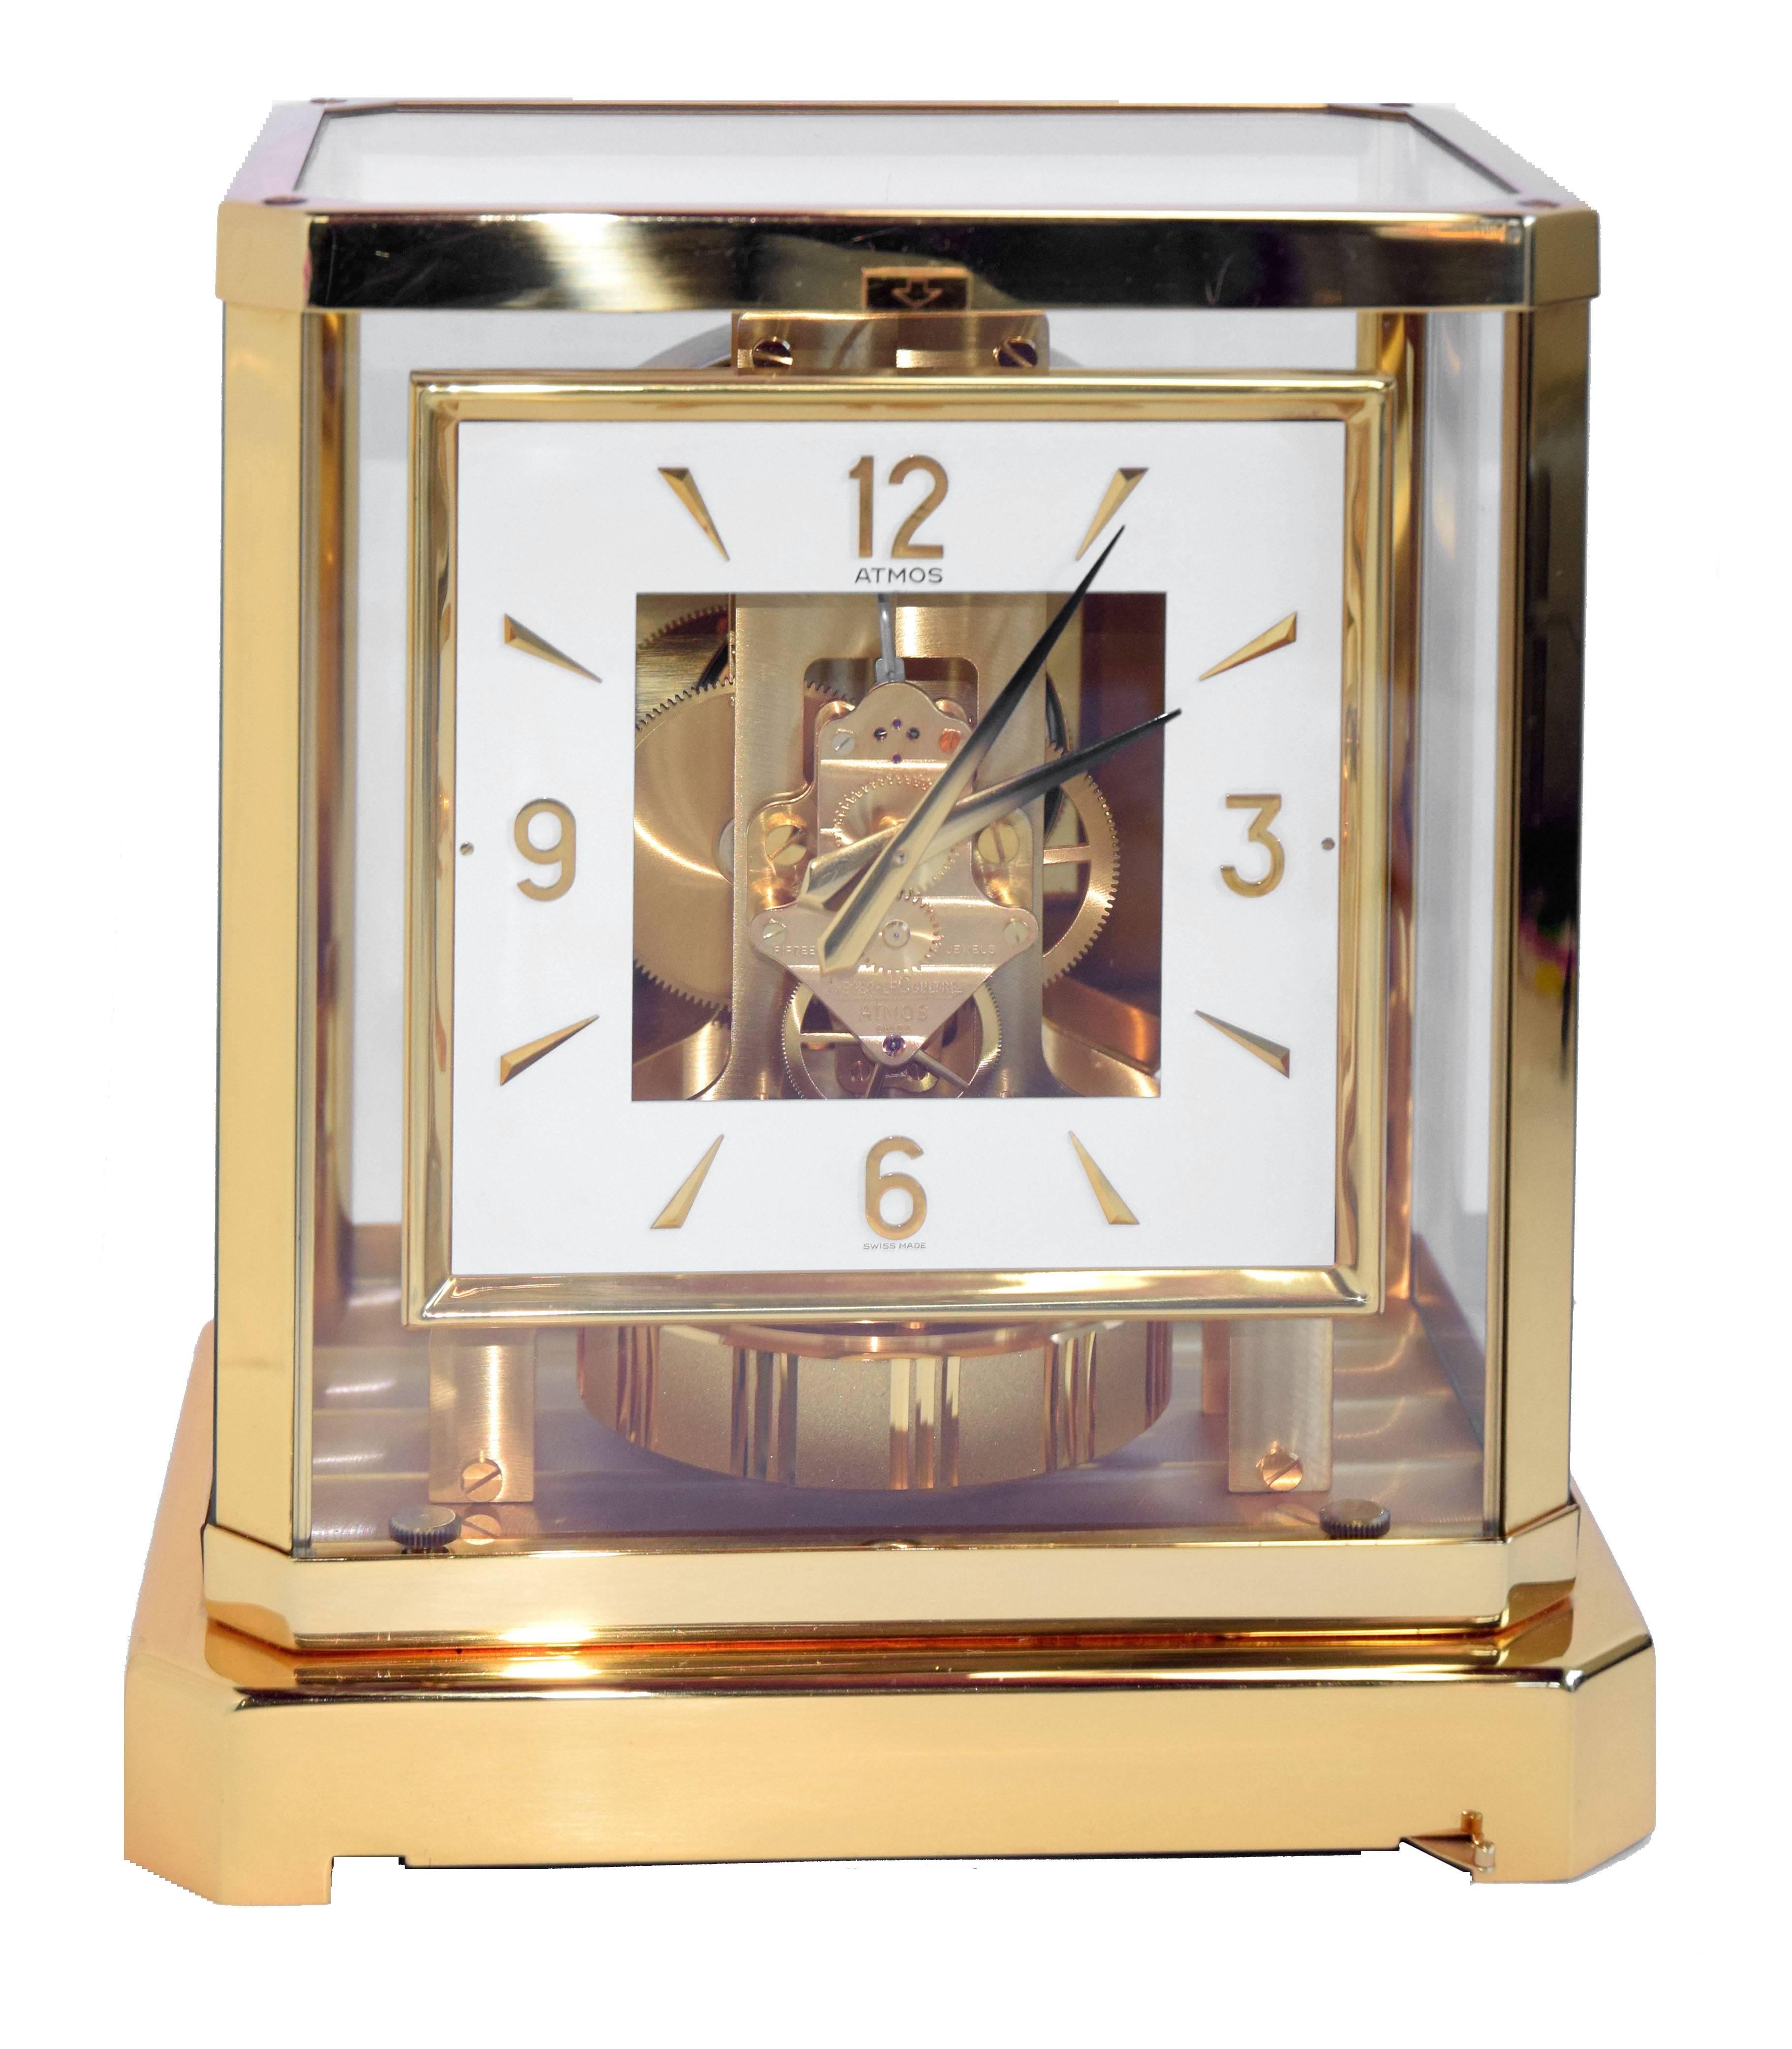 Jaeger-LeCoultre Atmos perpetual motion gold-plated 15 jewel clock. Model number 528-8, circa 1984. The clock is in perfect working order, white square dial is in excellent condition (more rare), has Arabic gold-plated over brass numerals going